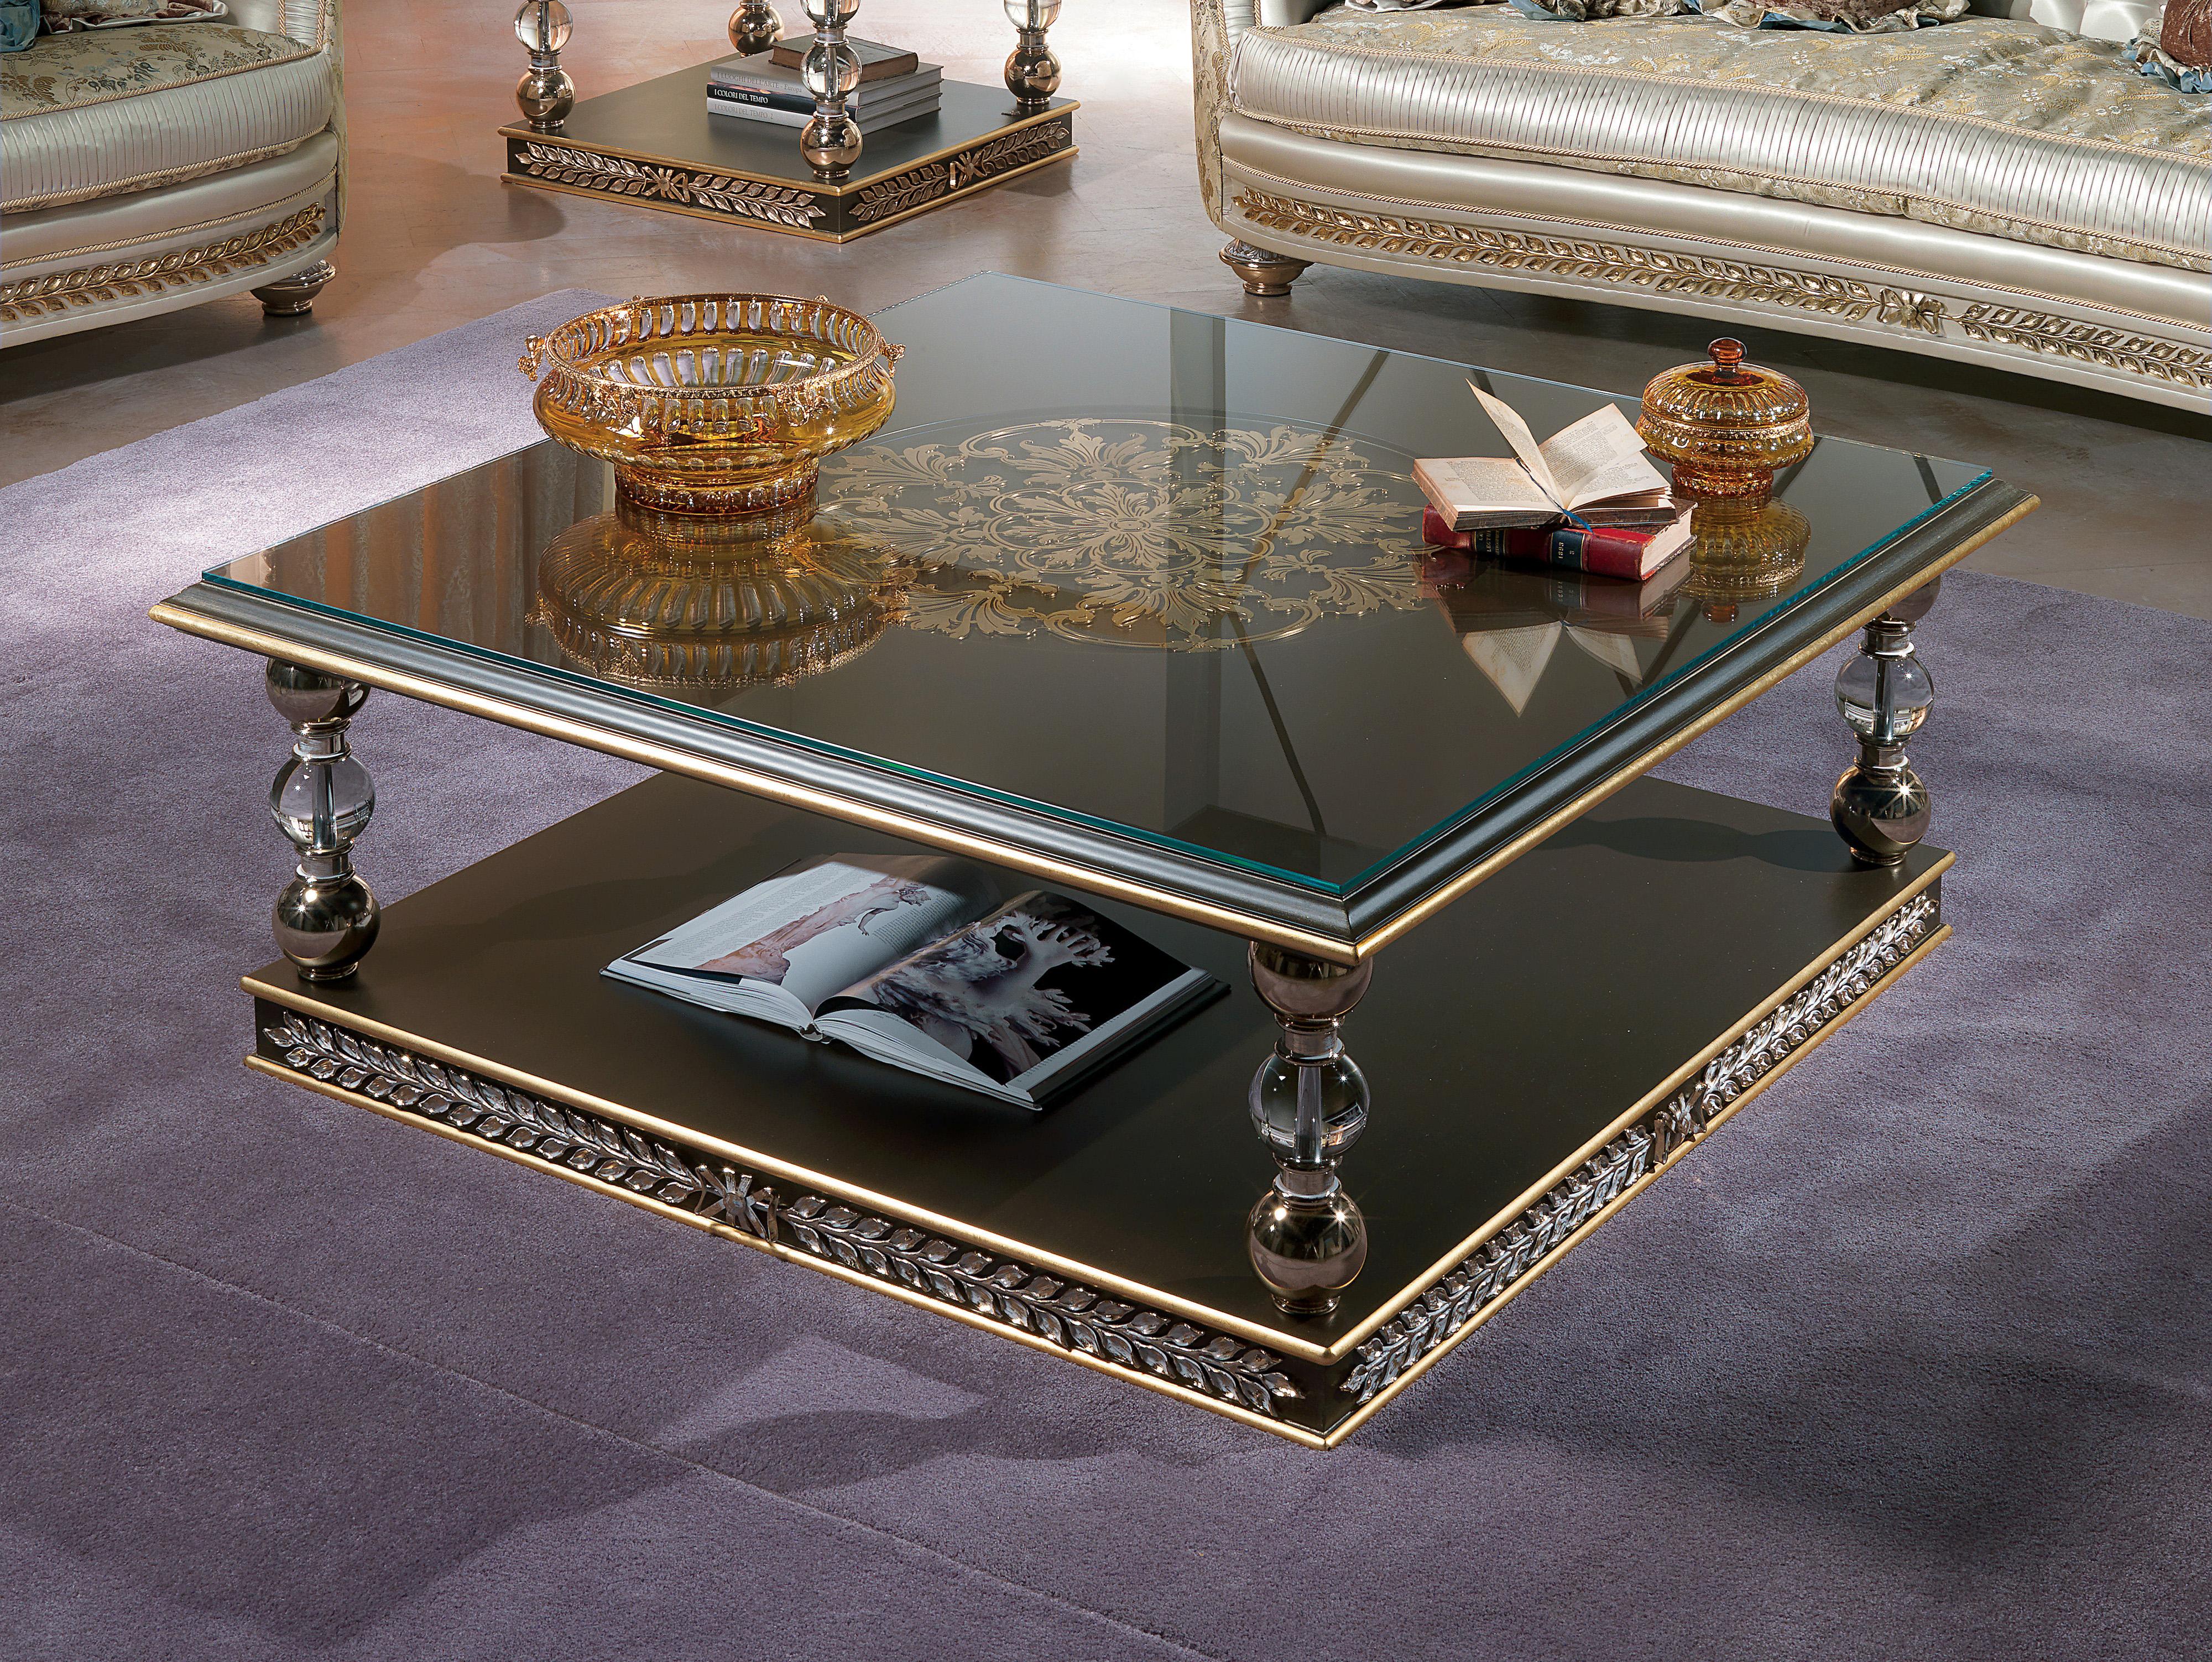 The ES074 coffee table  is a design creation that combines high-quality materials and impeccable craftsmanship to create a unique piece that will add style and sophistication to your environment.

The legs of this coffee table are the real strength